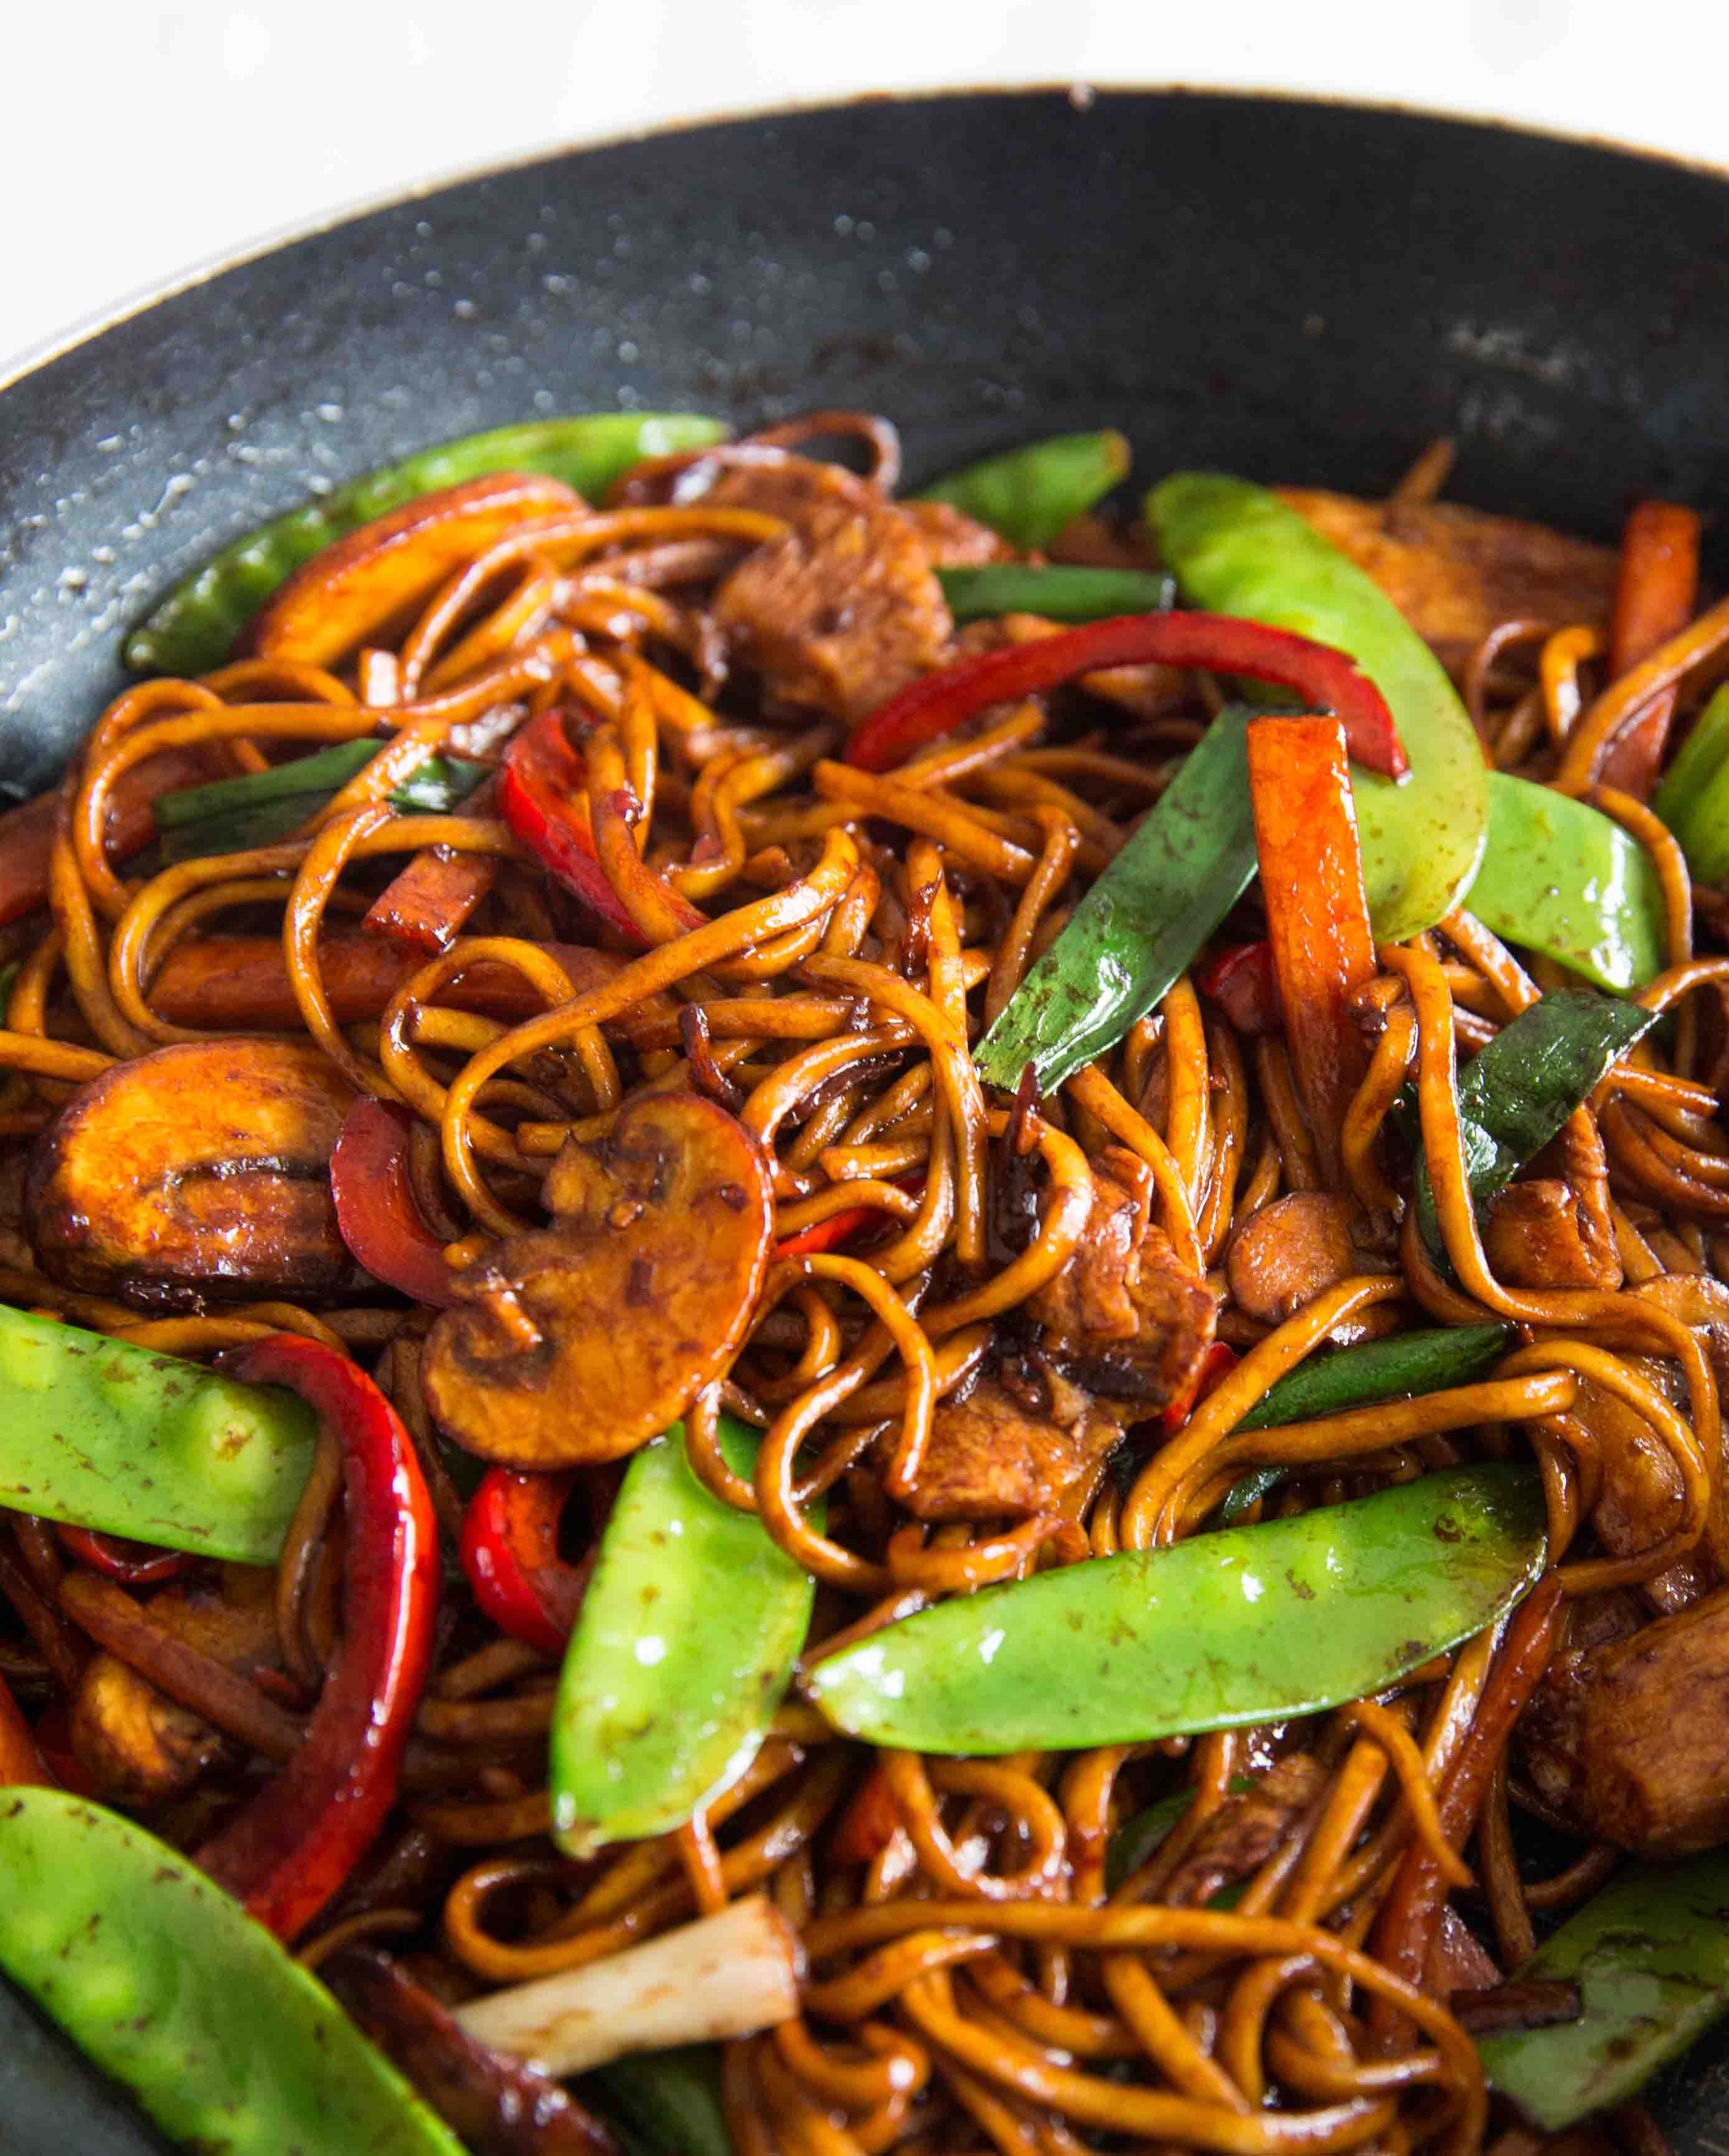 Chicken Stir-Fry with Noodles Recipe: How to Make It